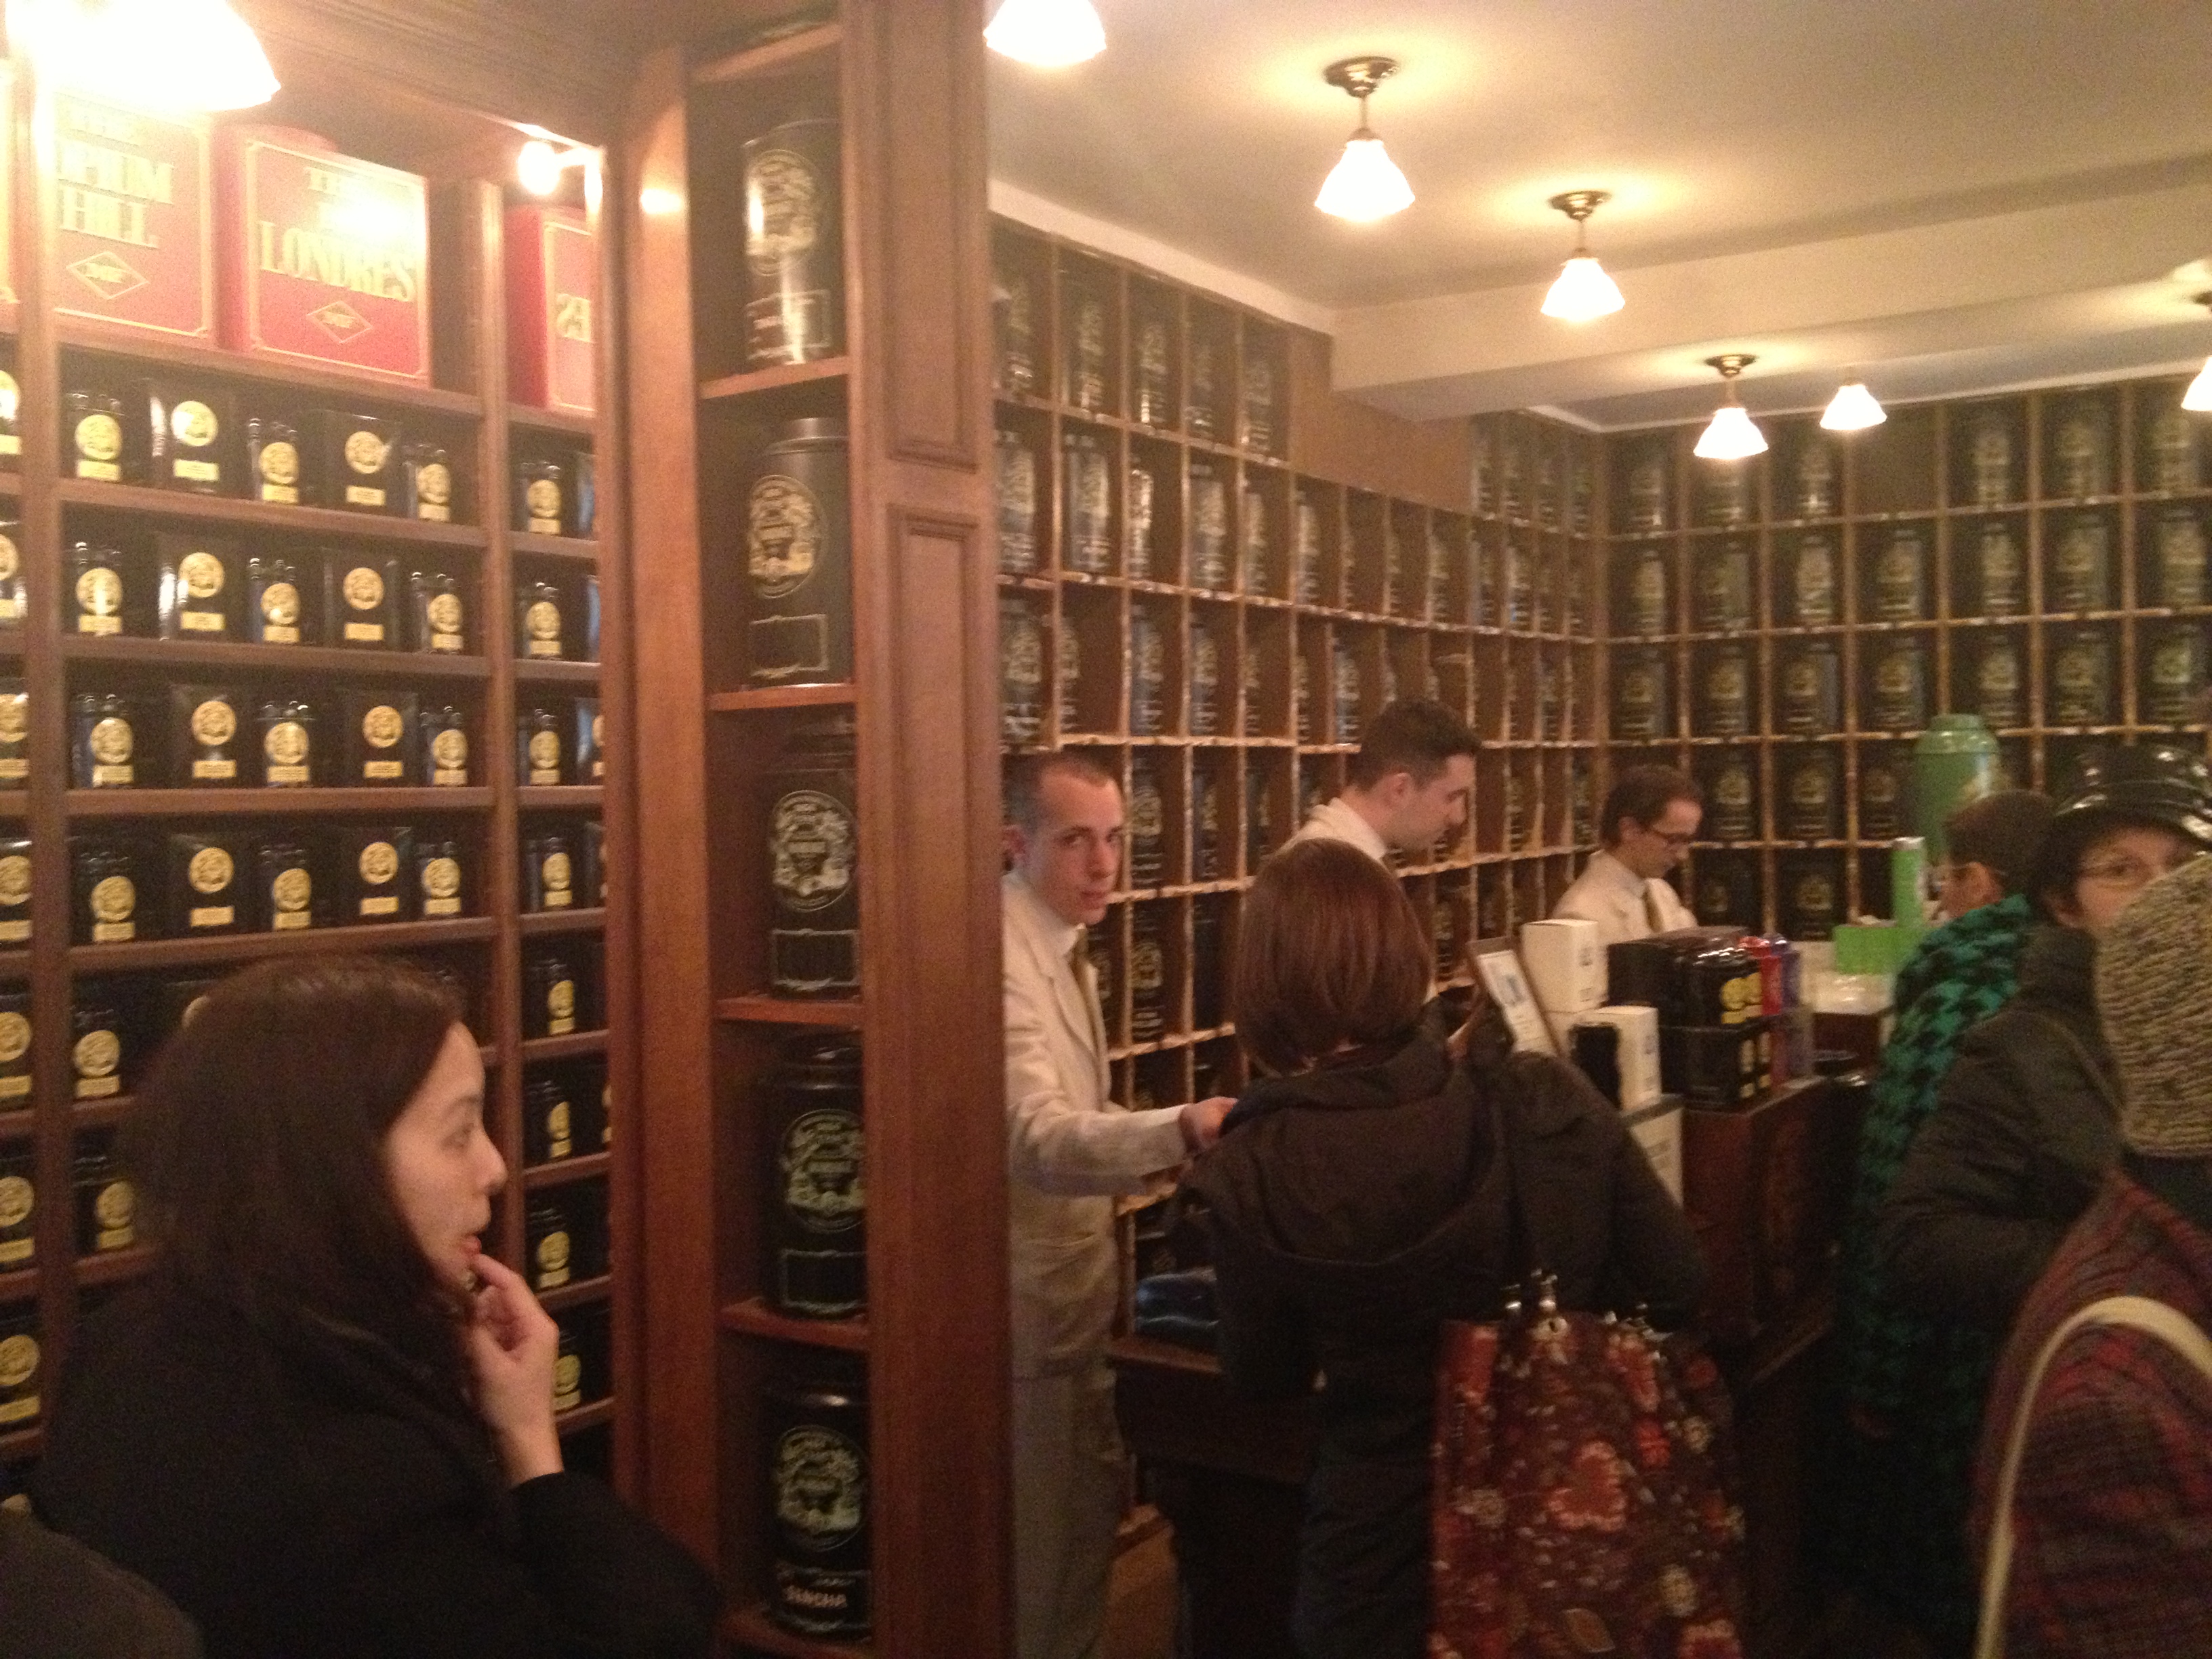 Top 7 teas and chocolates from Mariage Frères, the luxury Parisian tea  house - Wrap Your Lips Around This